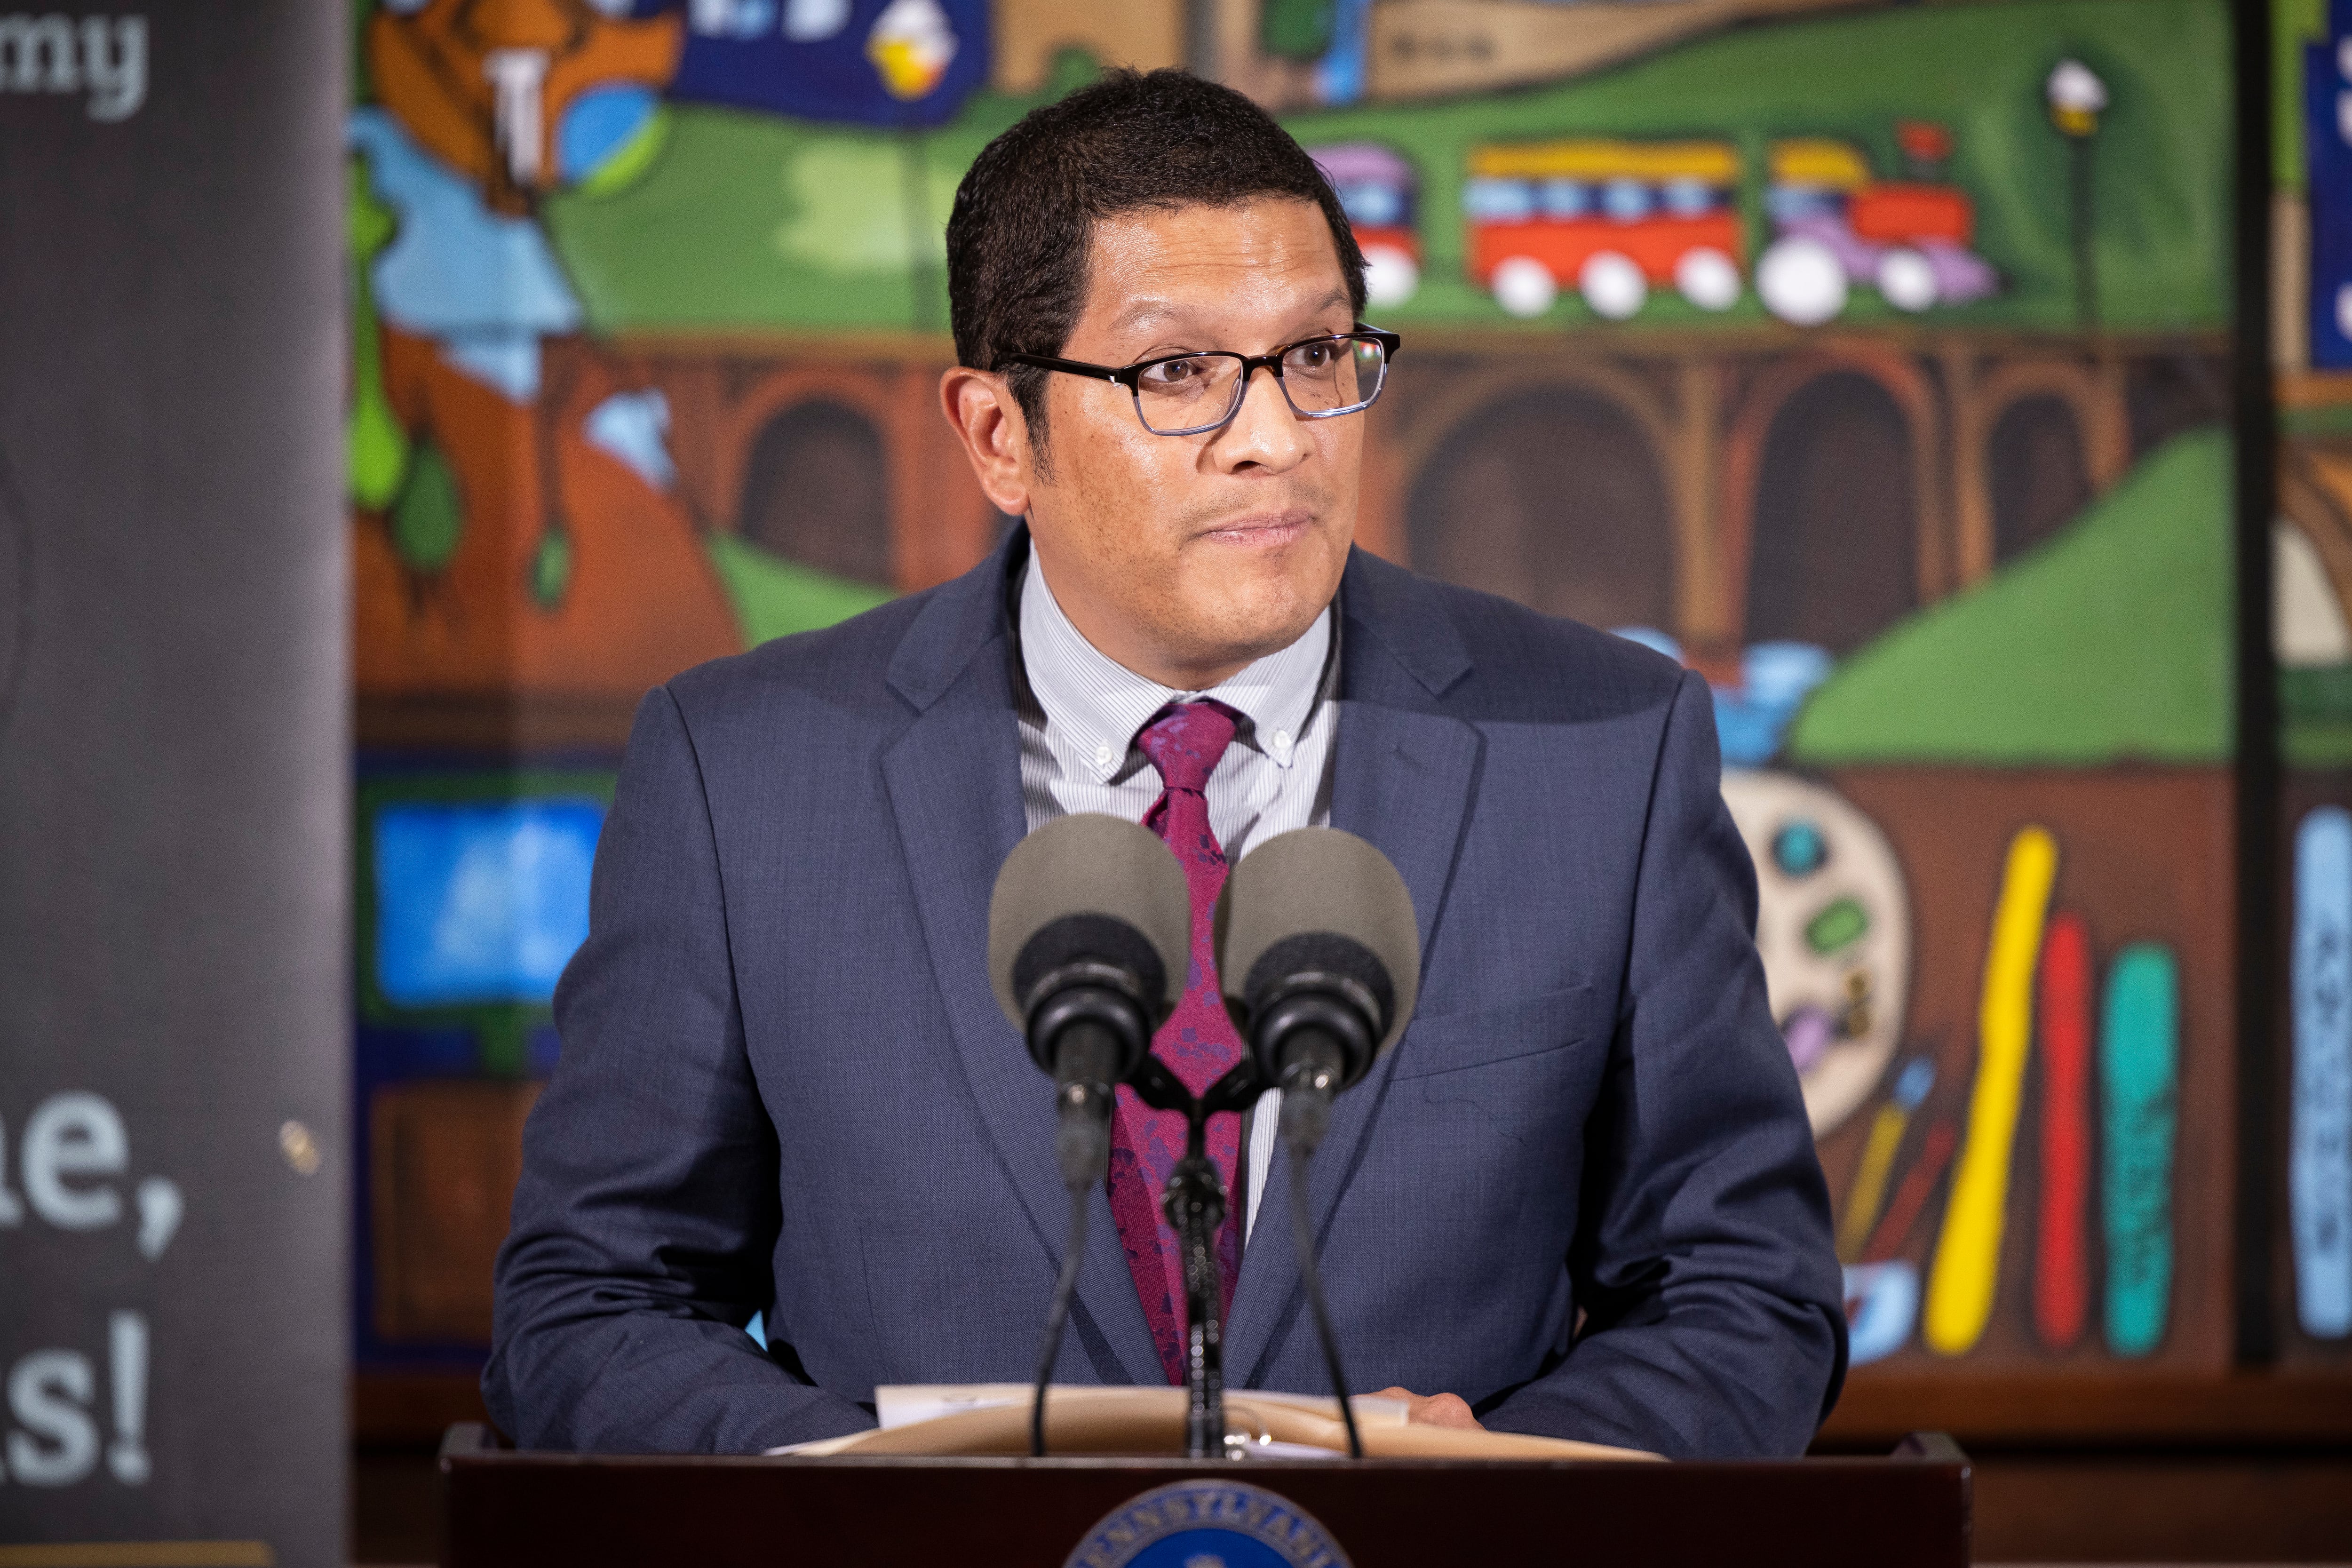 Standing in front of a colorful mural, Pennsylvania secretary of education Noe Ortega answers questions during a press conference.